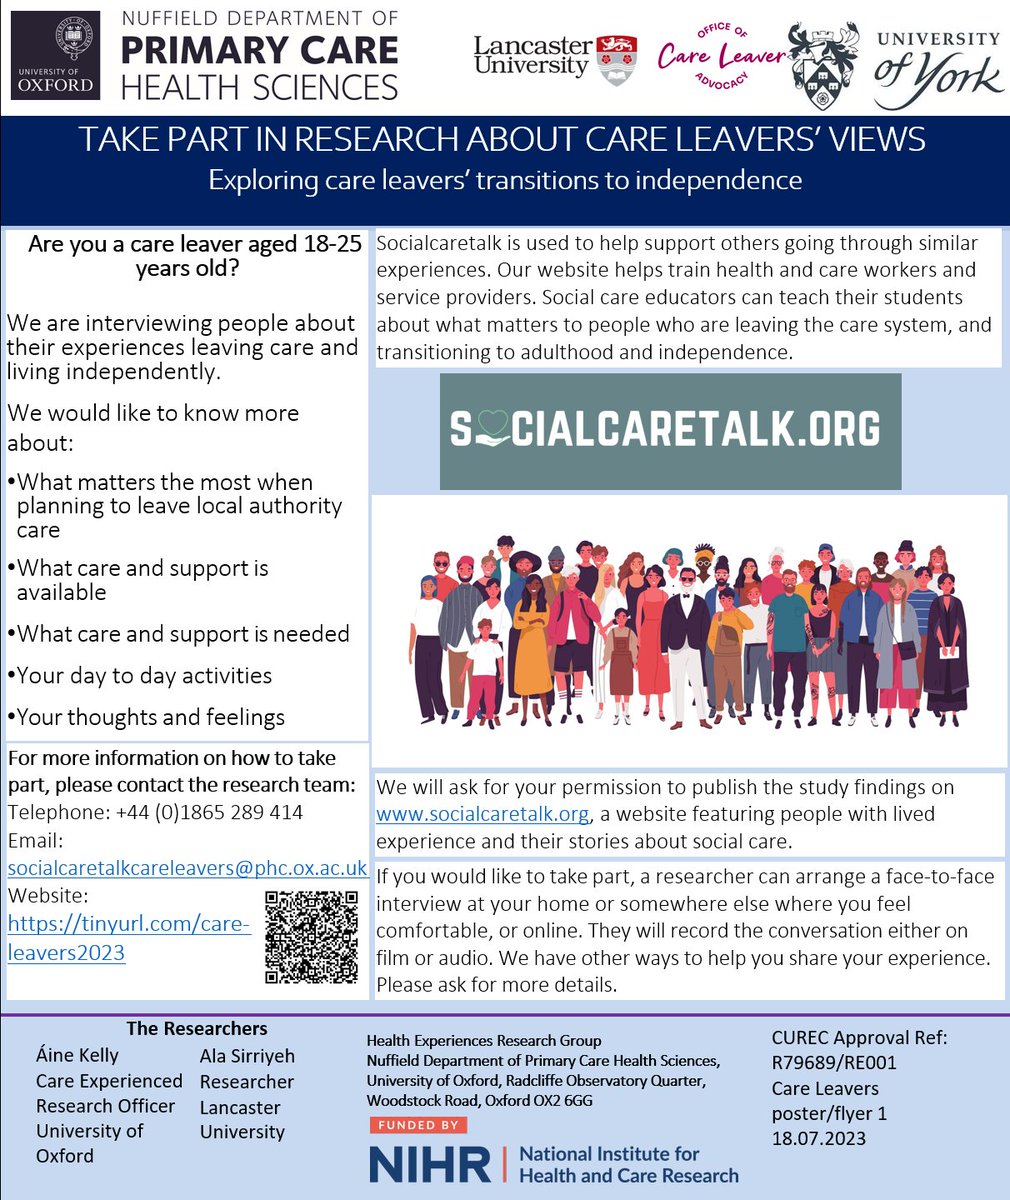 We are working with @NAVSH_UK and #virtualschools to recruit #careleavers 18-25 years old to participate in our #research study. We are still recruiting! Please view our video📽️ here tinyurl.com/Care-Leaver-Re…